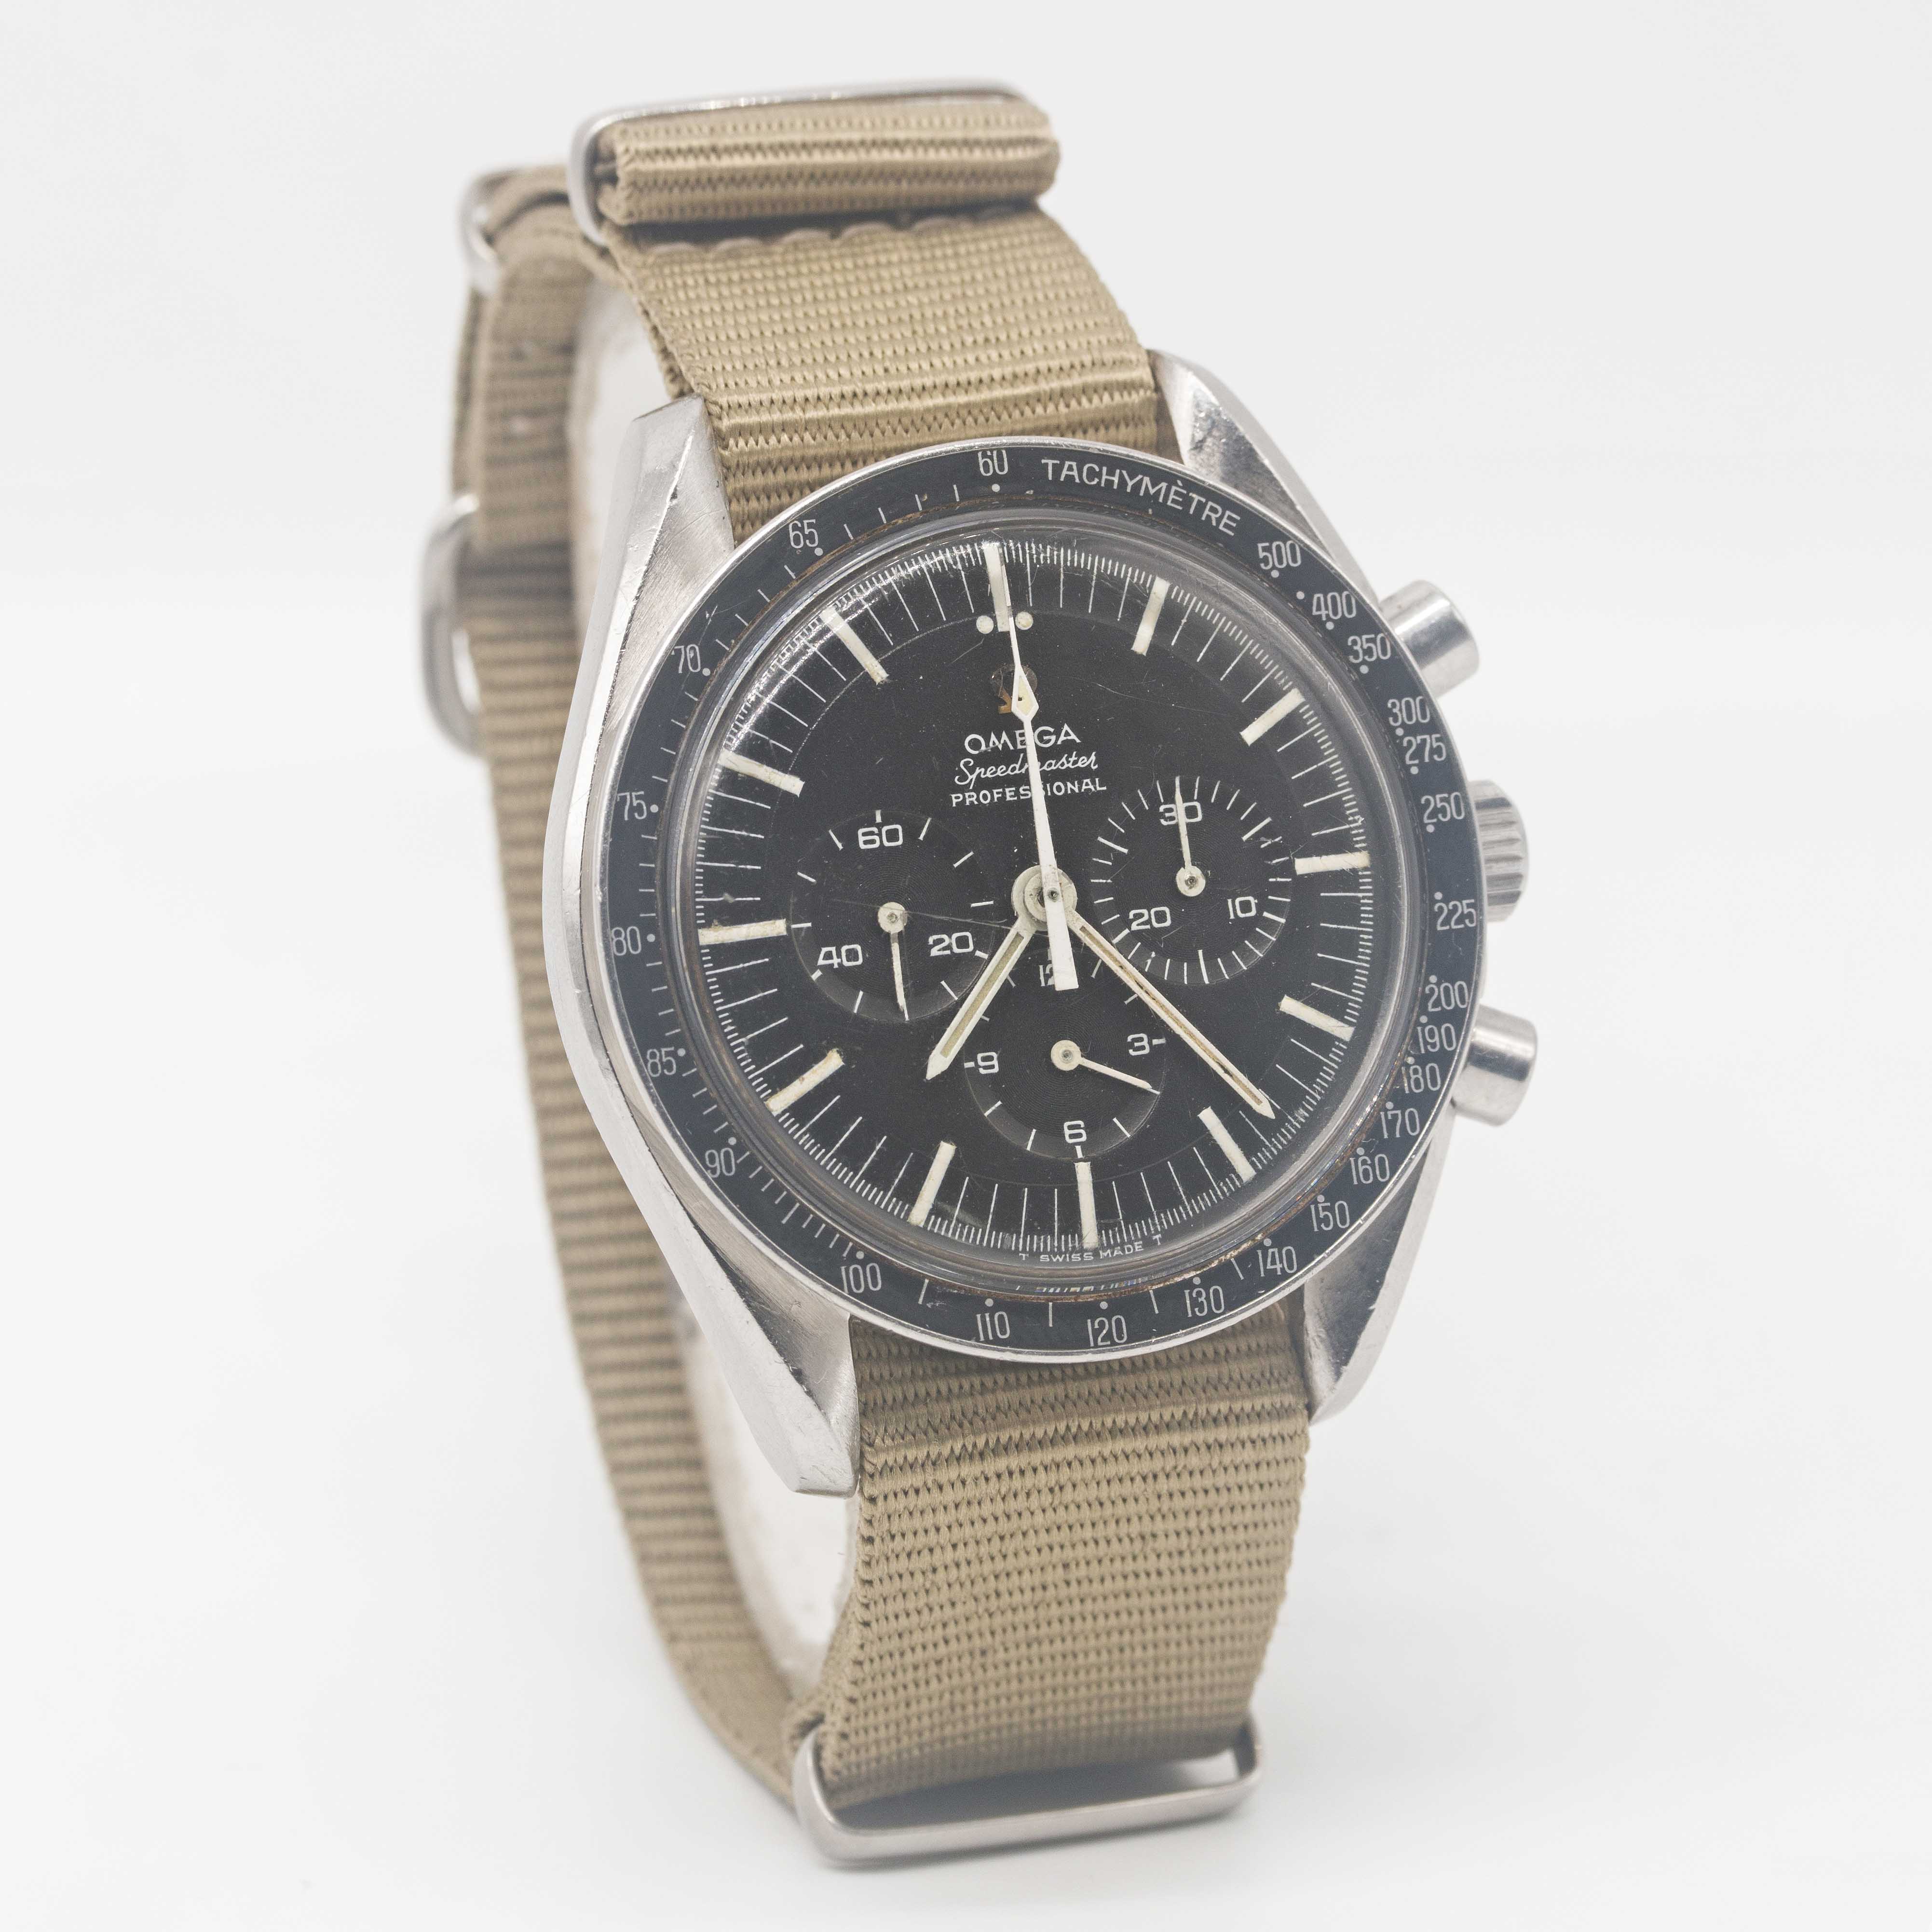 A RARE GENTLEMAN'S STAINLESS STEEL RHODESIAN MILITARY OMEGA SPEEDMASTER PROFESSIONAL "PRE MOON" - Image 4 of 6